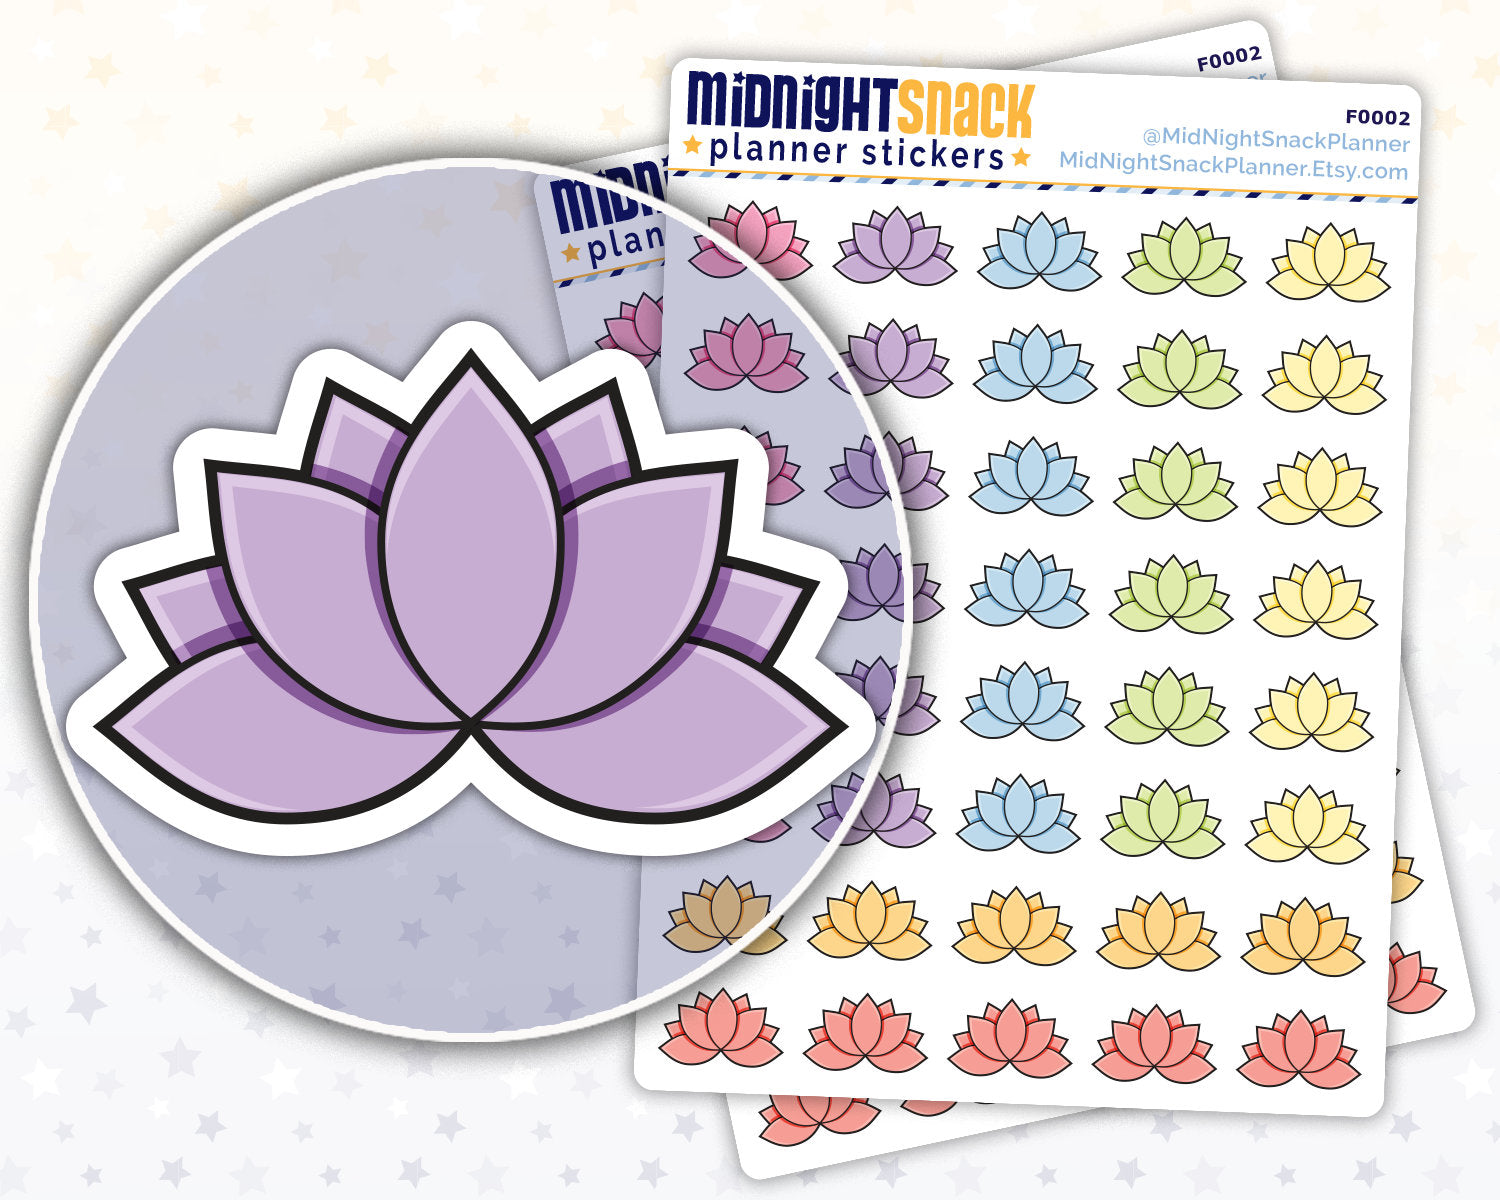 Lotus Flower Yoga Icon: Meditation, Health and Fitness Planner Stickers Midnight Snack Planner